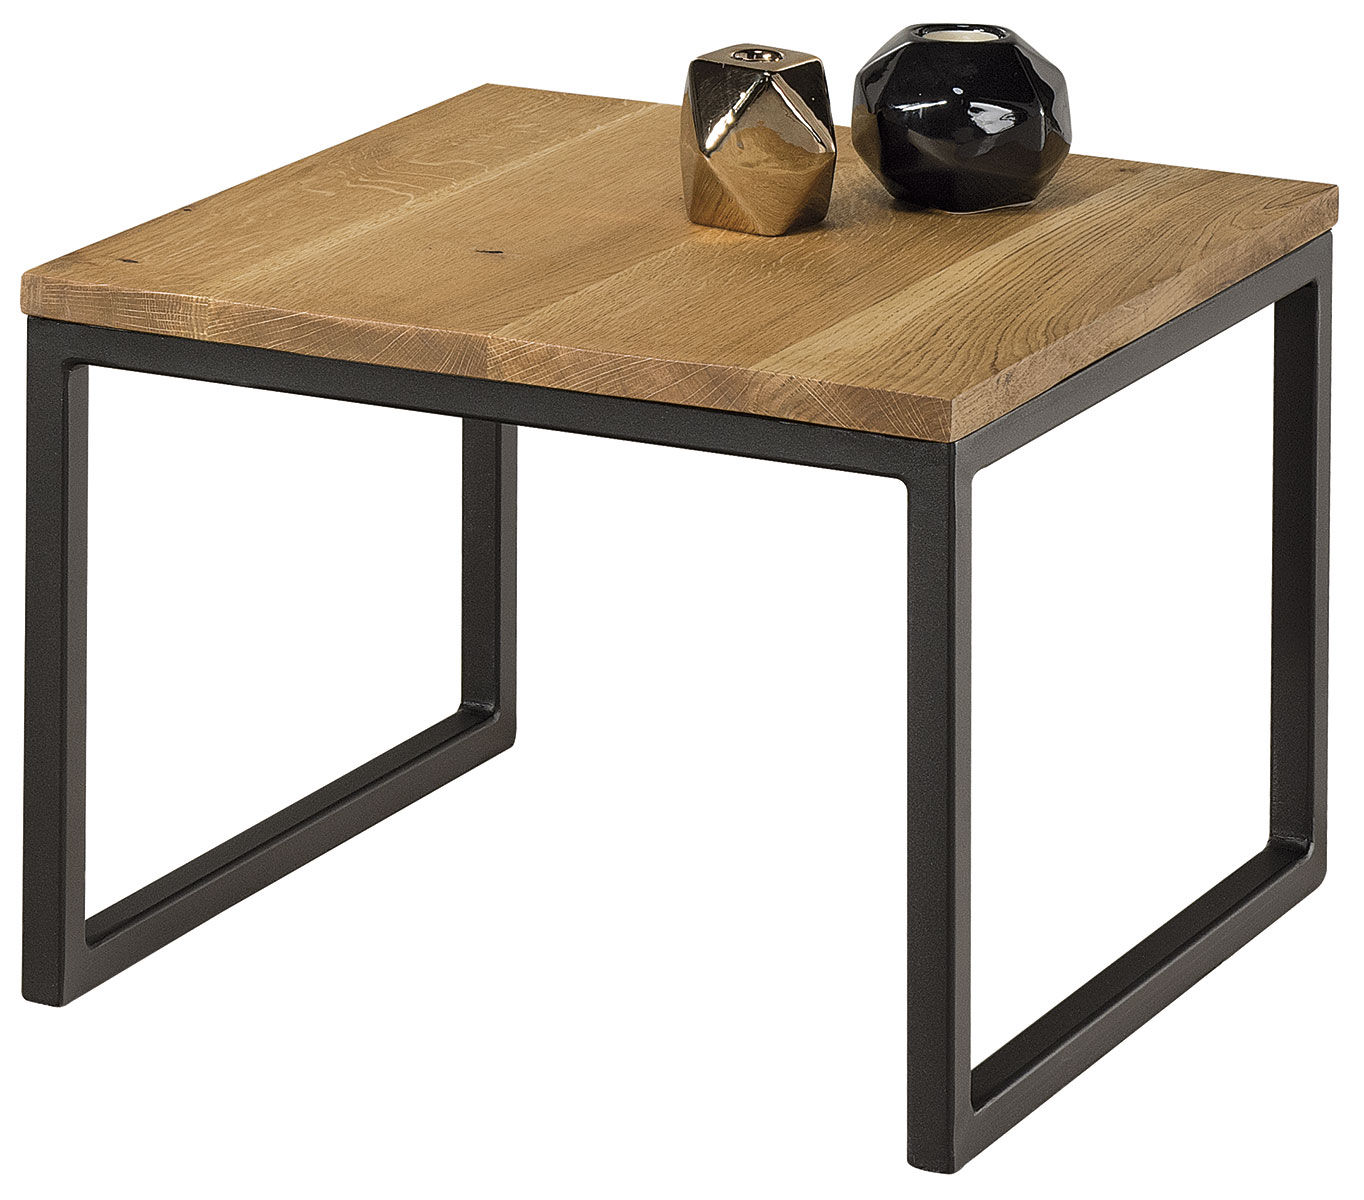 Cubik coffee table | Remo Meble